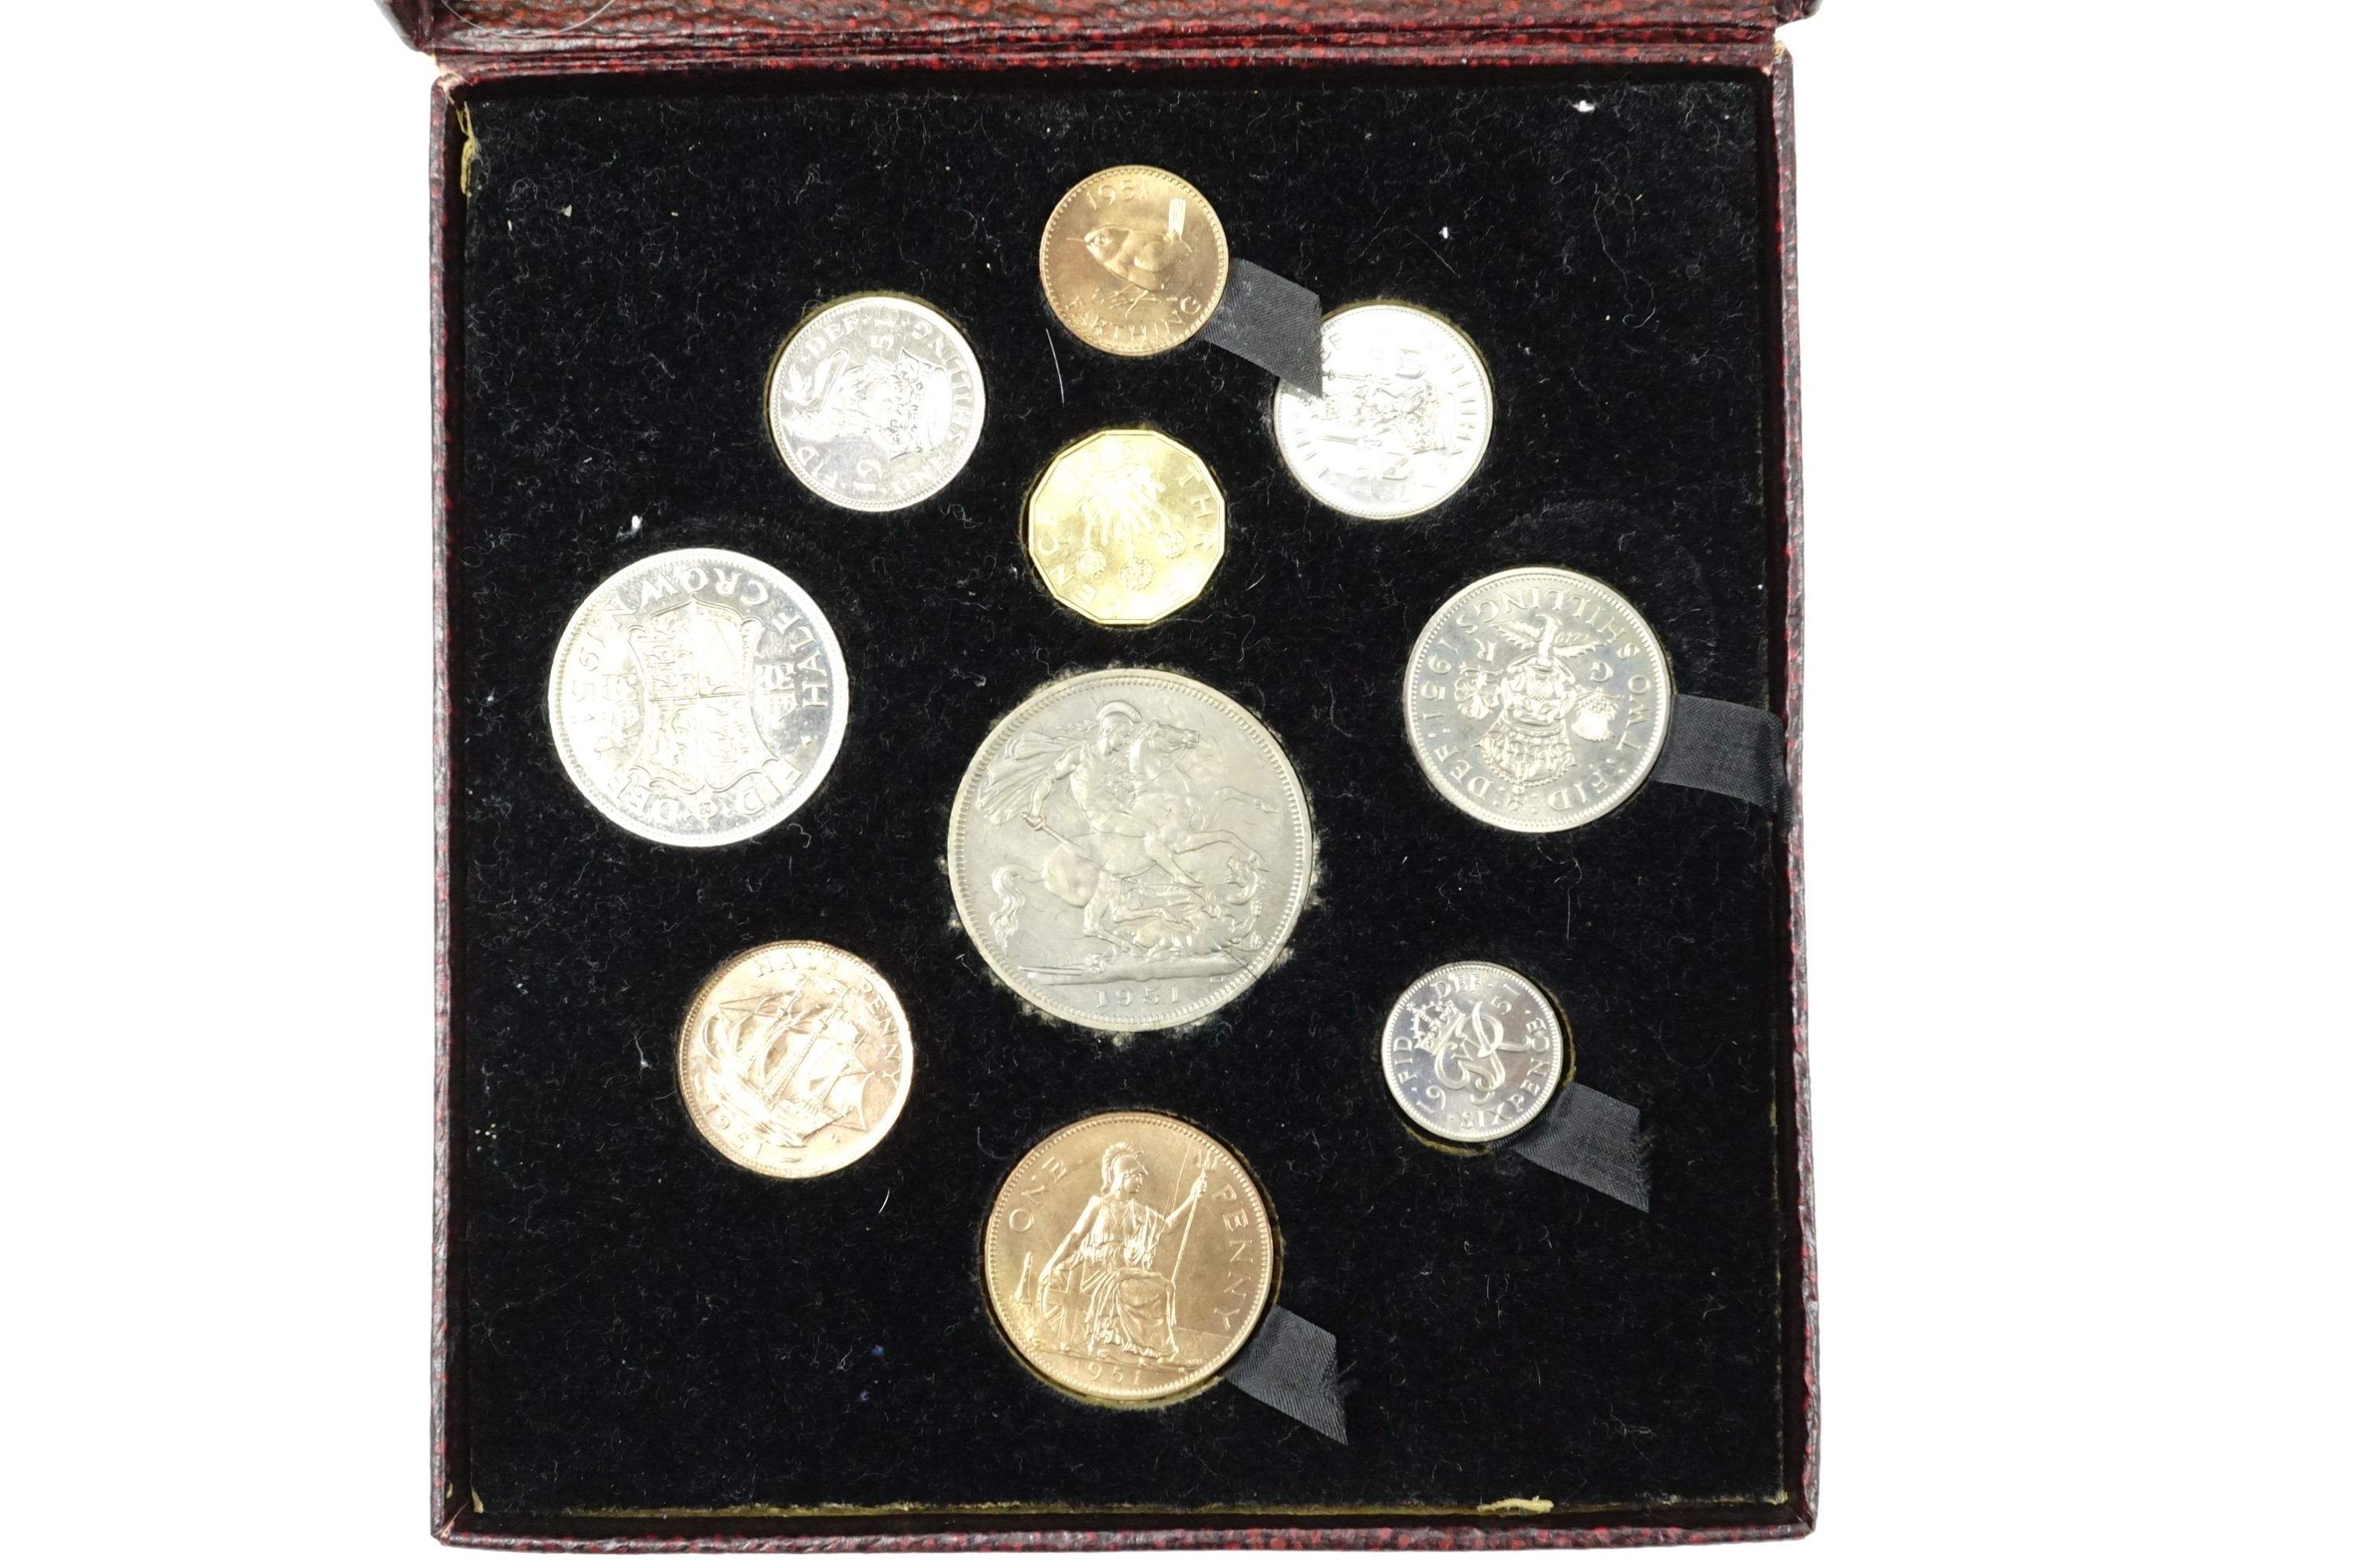 A cased Festival of Britain 1951 uncirculated coin set